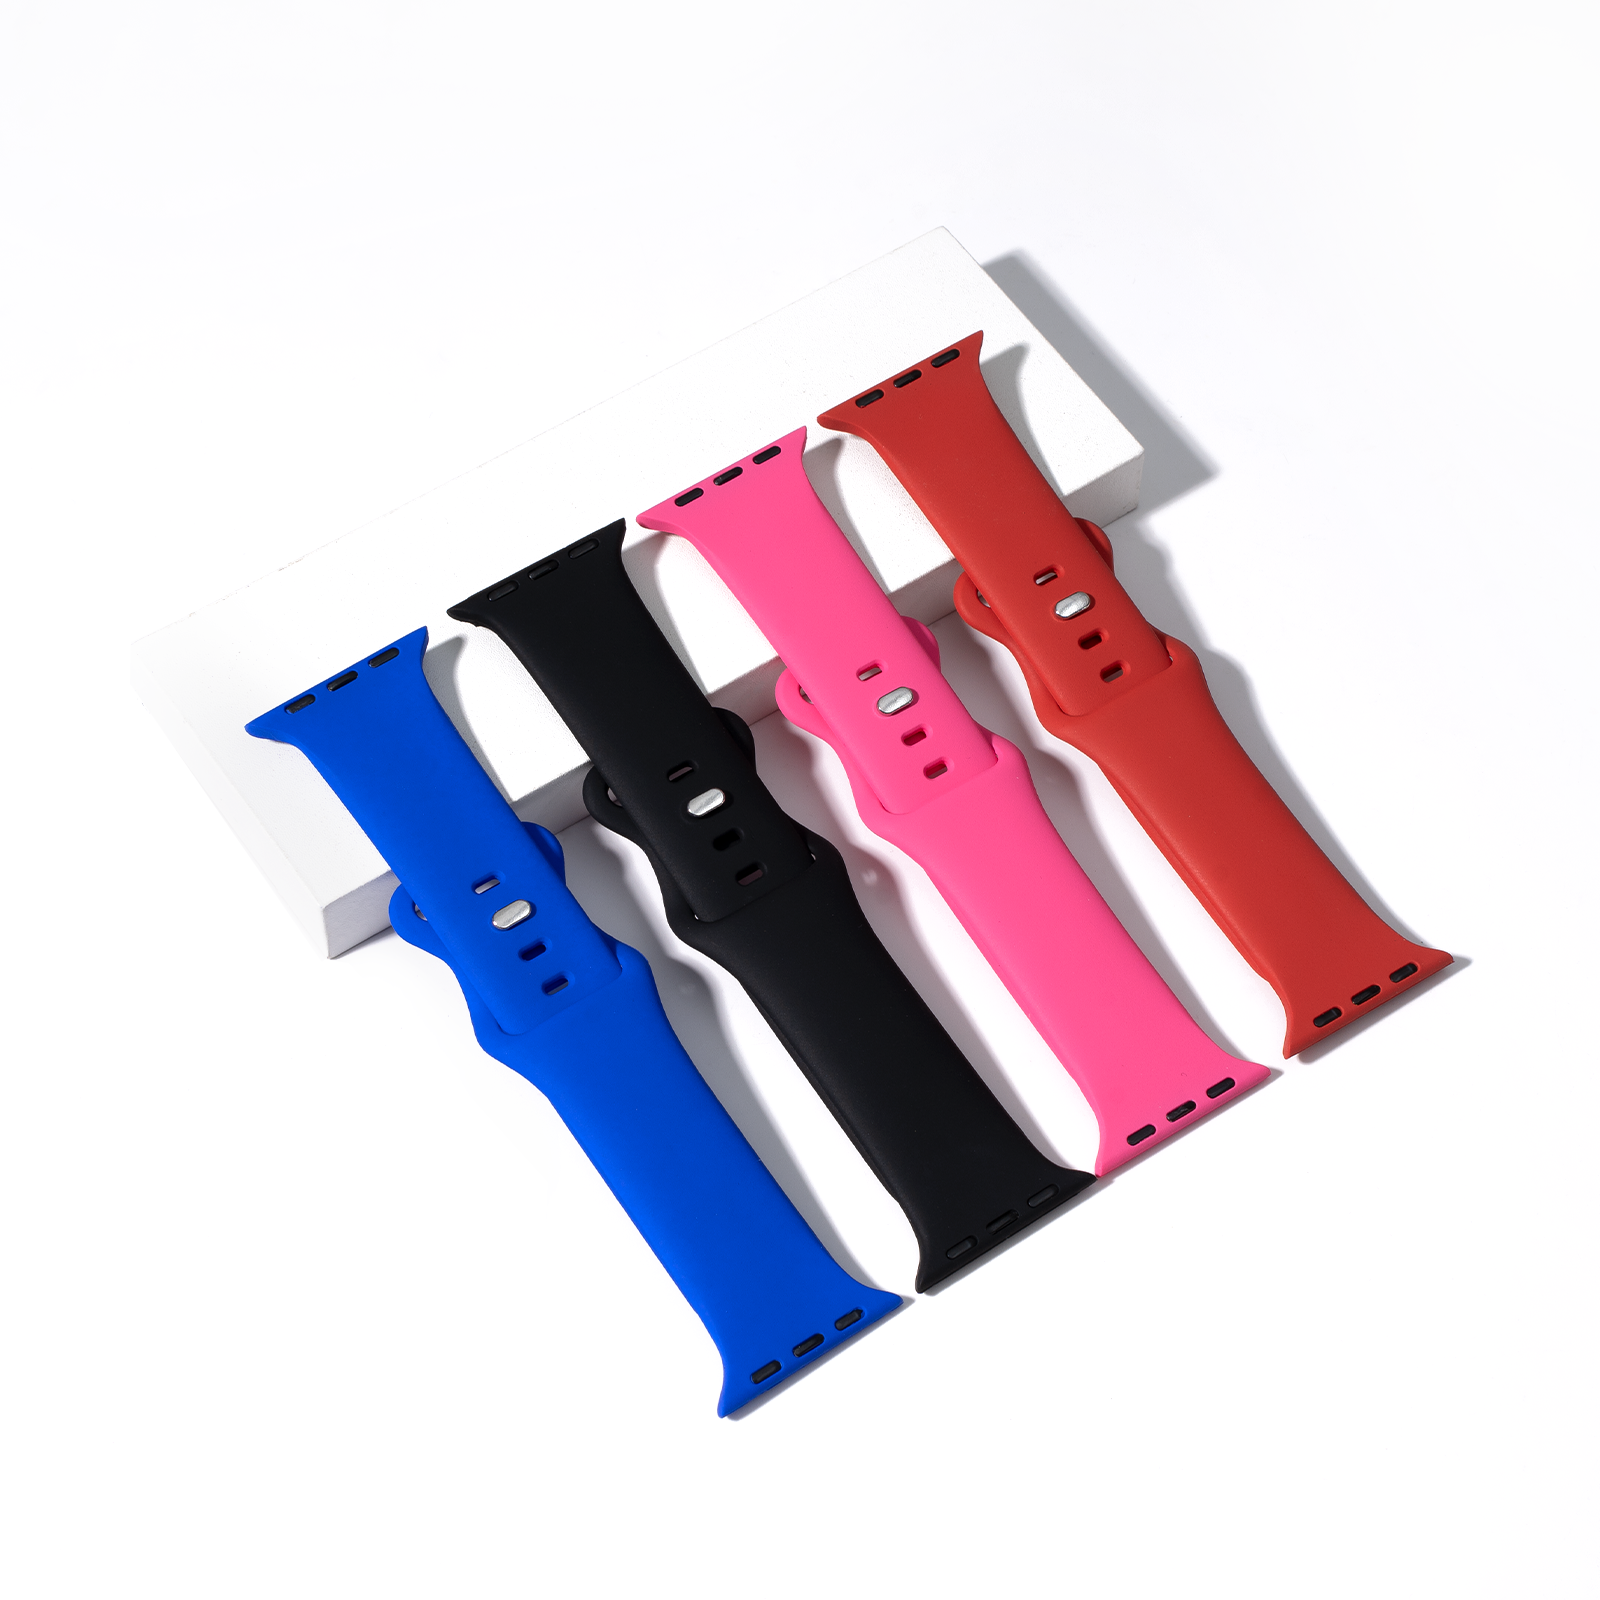 Silicone Apple Watch Bands with Laserable White Filling